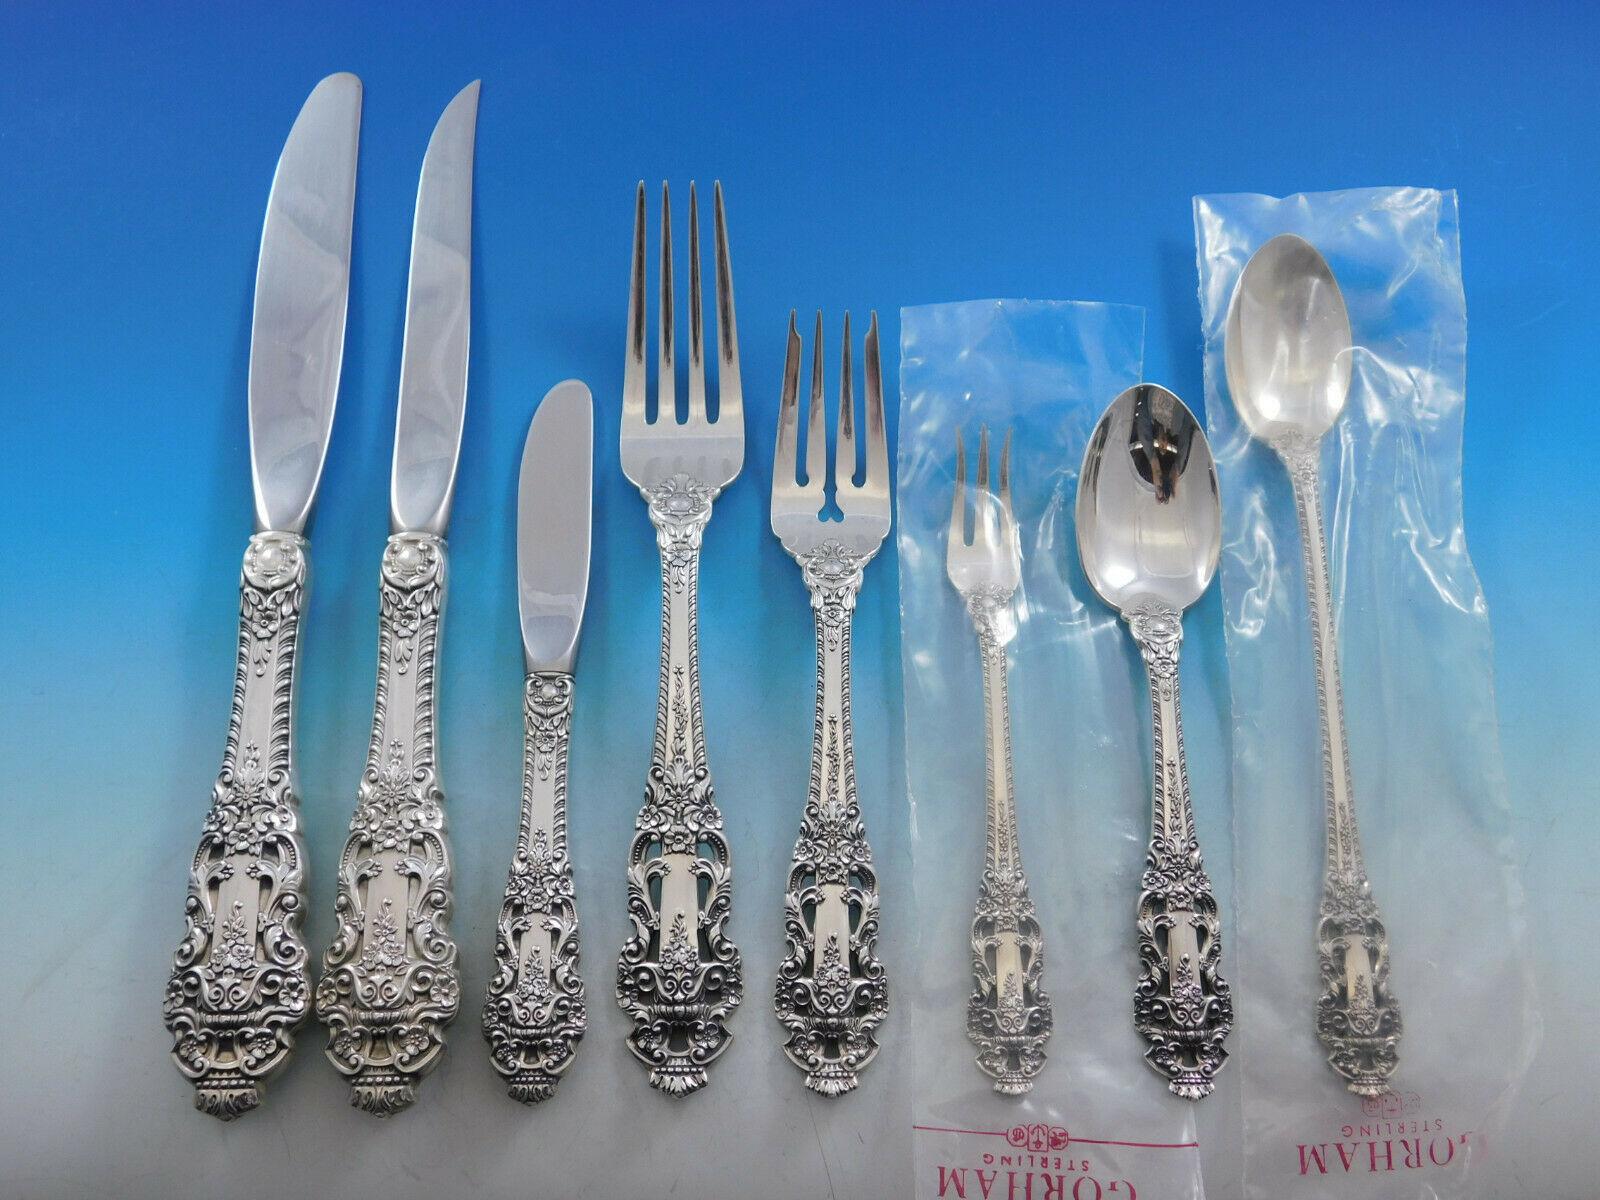 Monumental unused dinner size Crown Baroque by Gorham sterling silver flatware set - 107 pieces. Large, ornate, regal, and one of the most desirable patterns created by Gorham! This set includes:

12 large dinner knives, 9 7/8